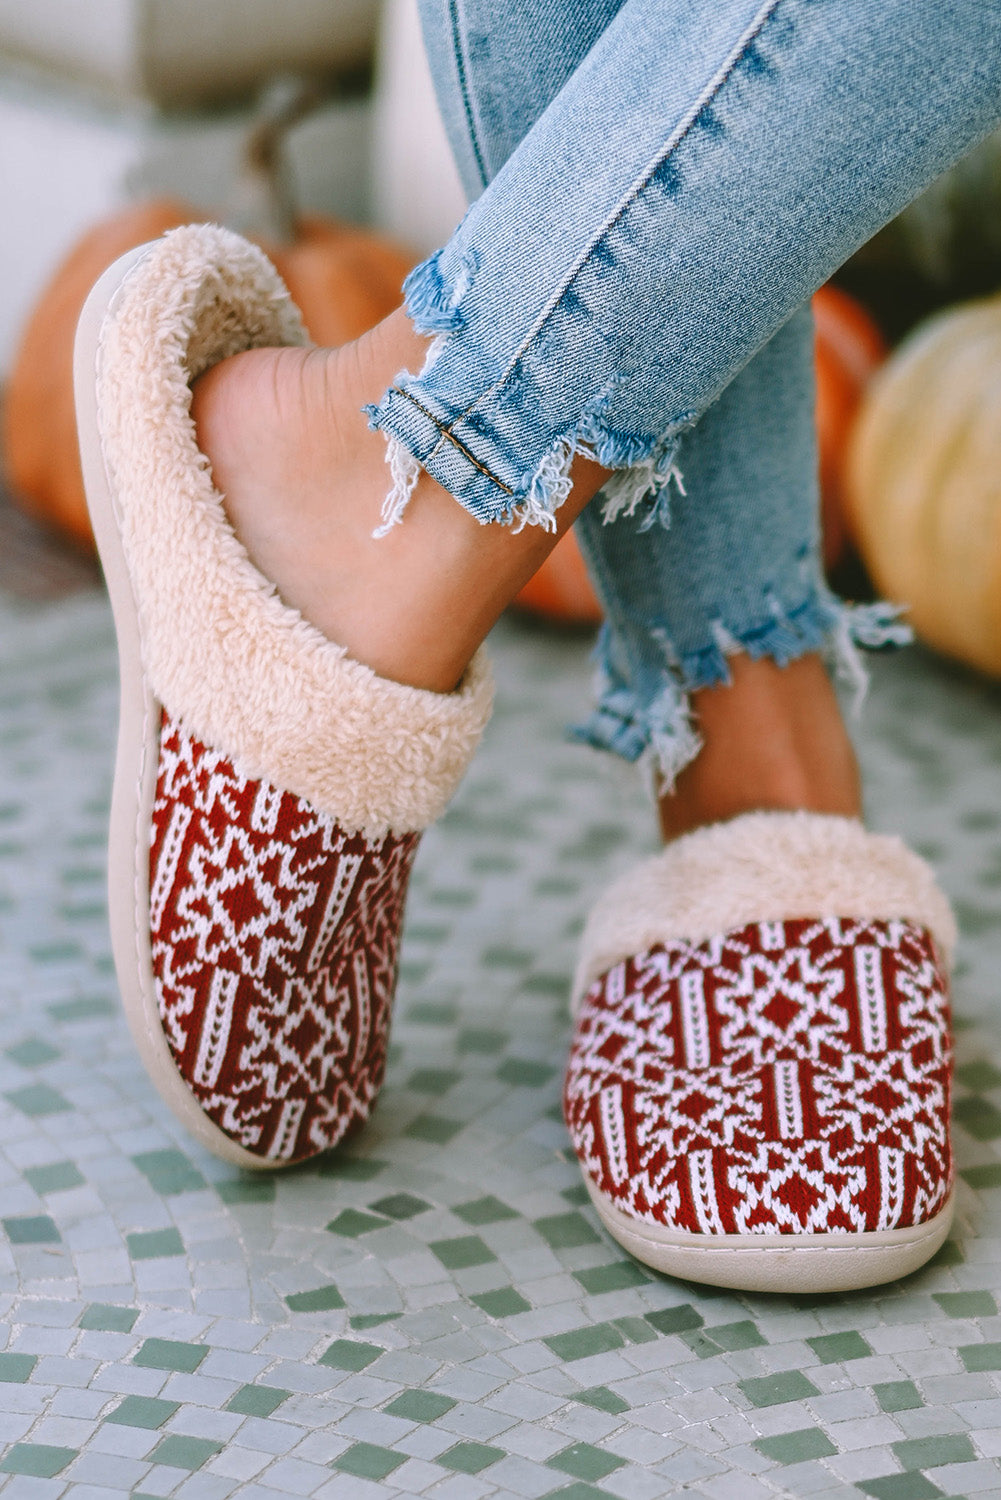 Red Suede Geometric Print Contrast Fuzzy Winter Slippers